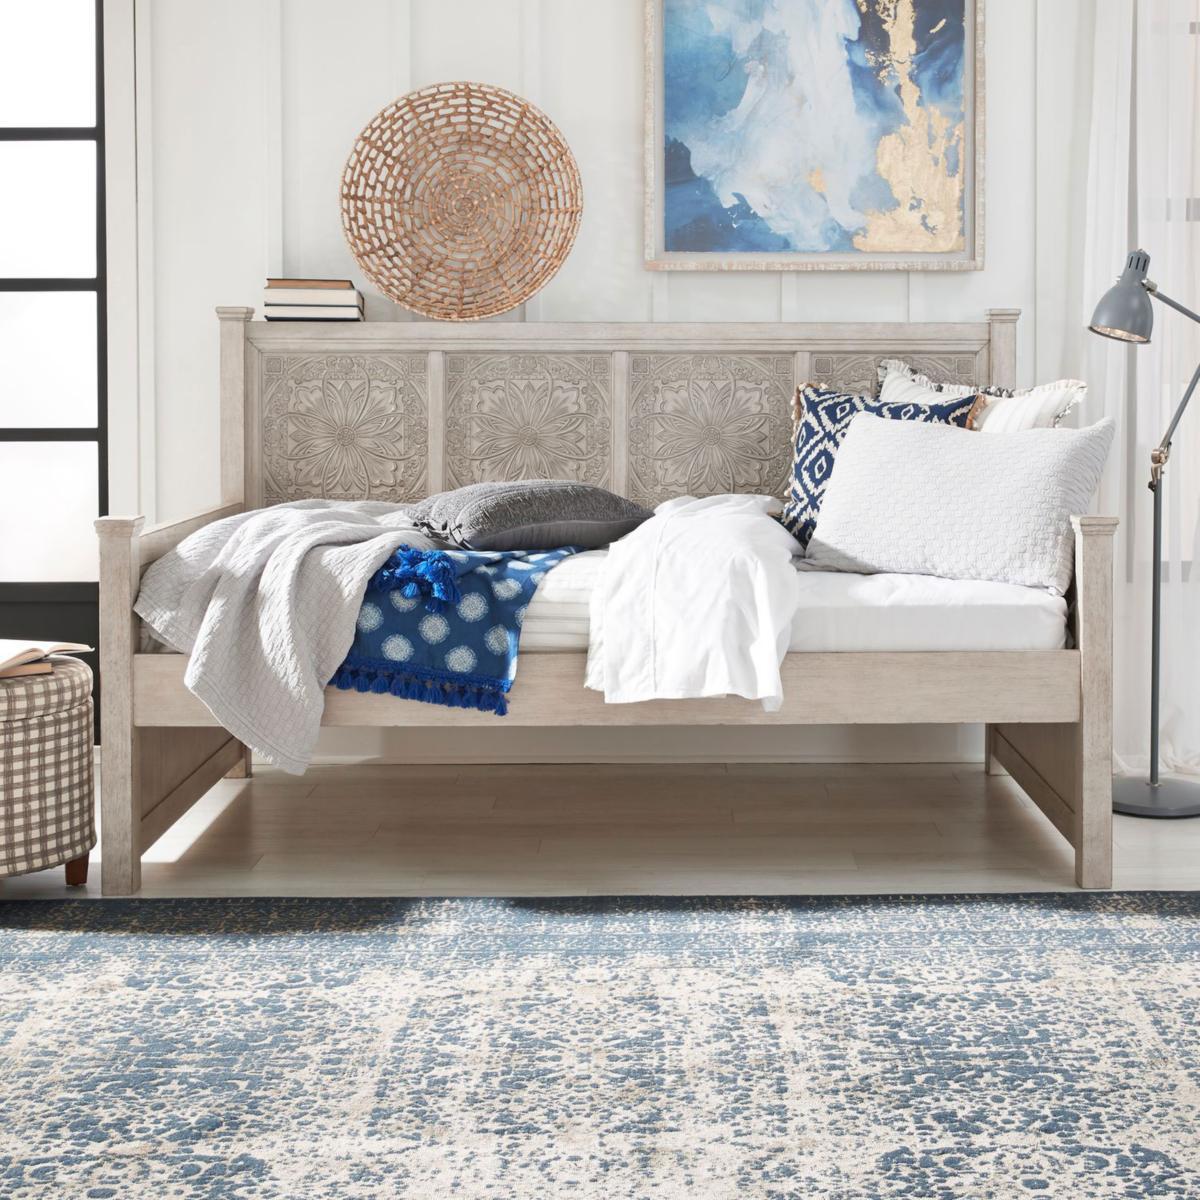 A stylish day bed with a decorative headboard